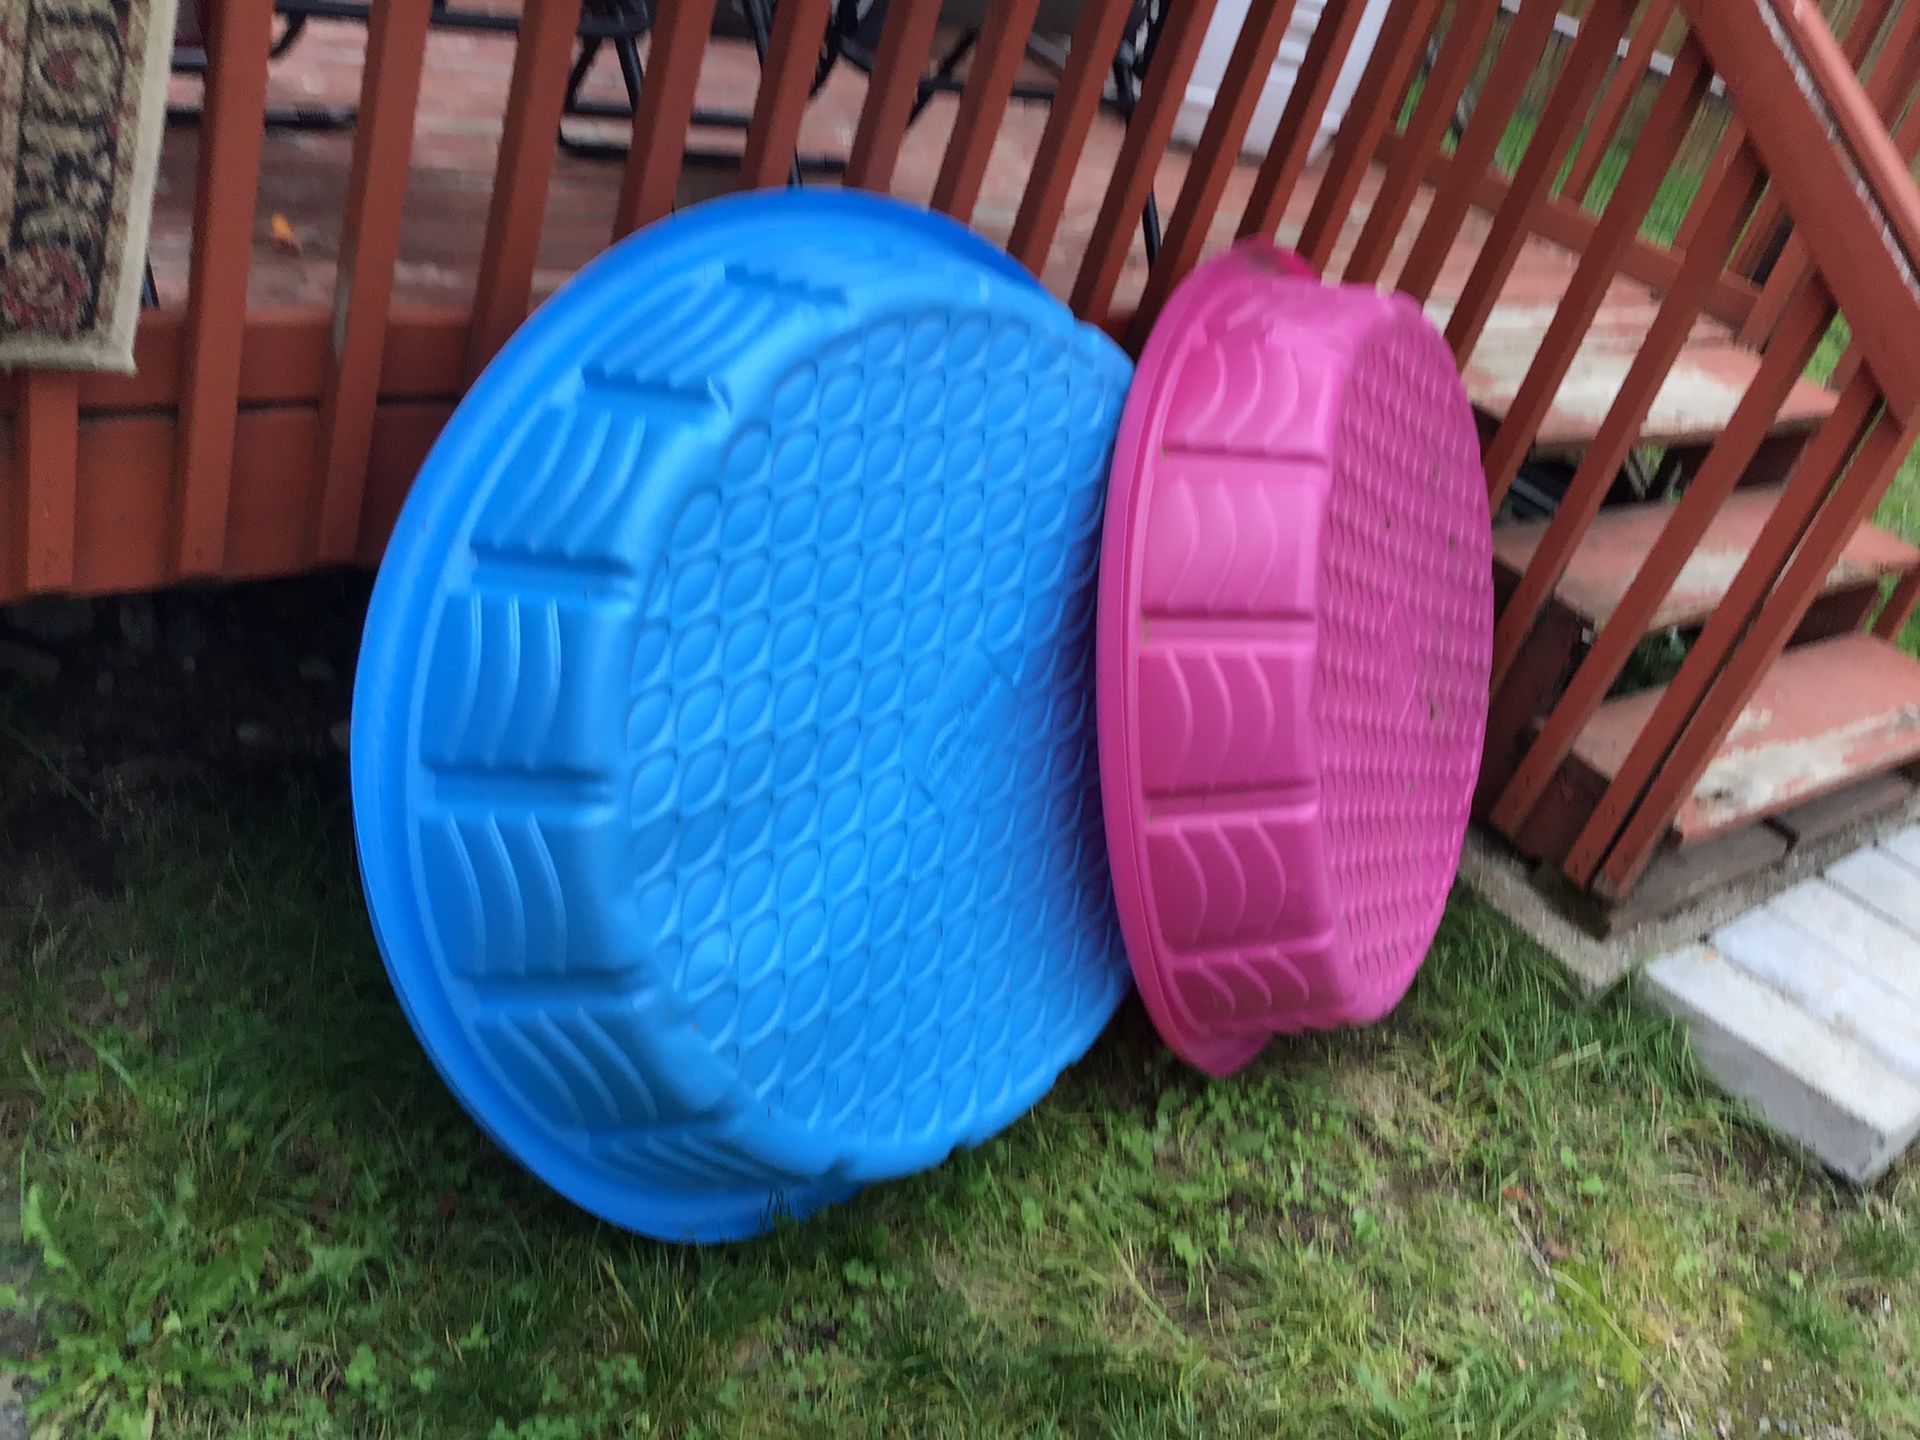 2 barely used swimming pools $10 for both Make great yard planters or water trough for farm animals. Cool baths for field animals,pets or of course c